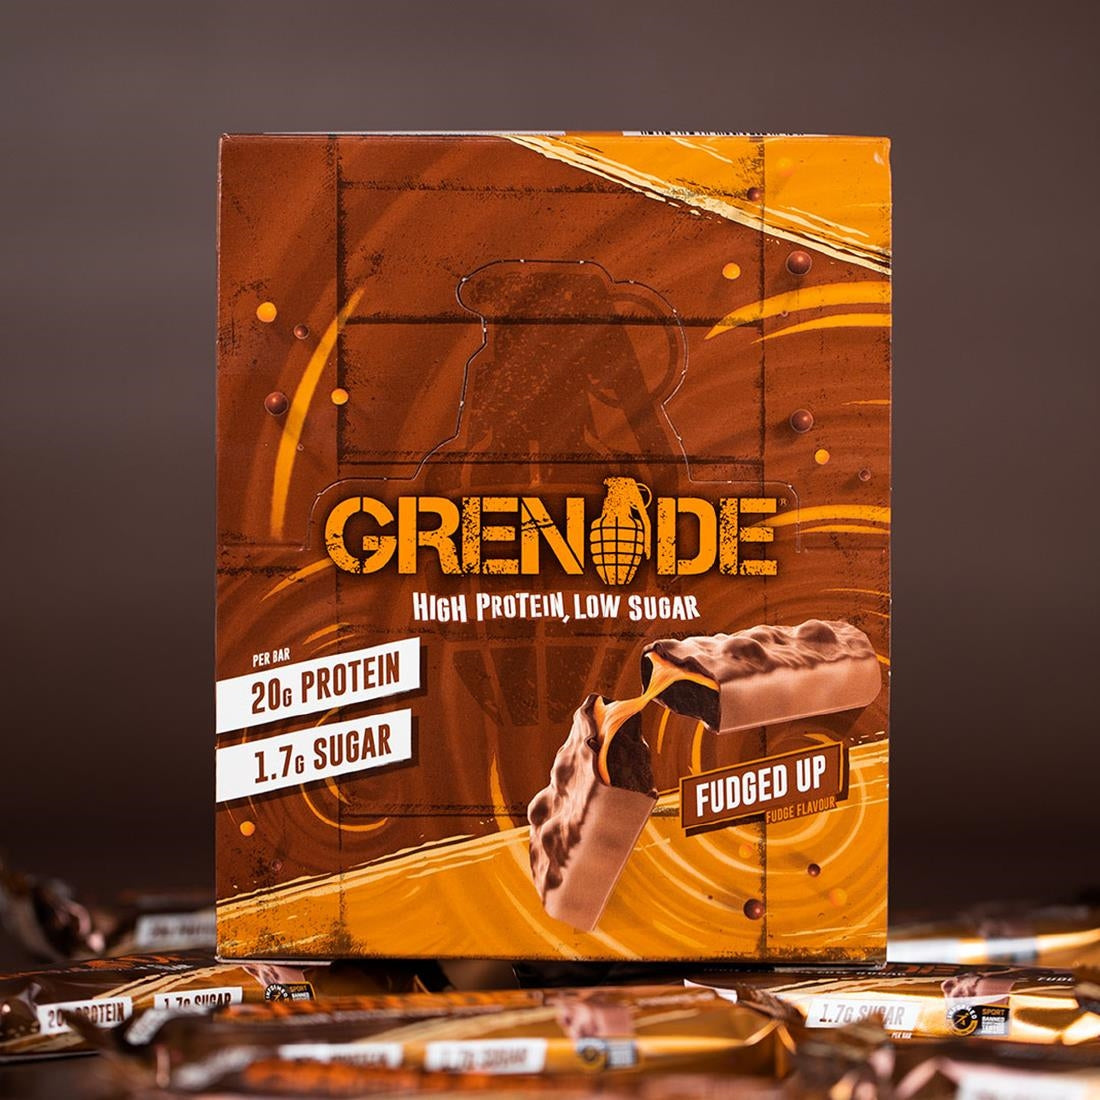 CZ777 Grenade Protein Bar Fudged Up 60g (Pack of 12)